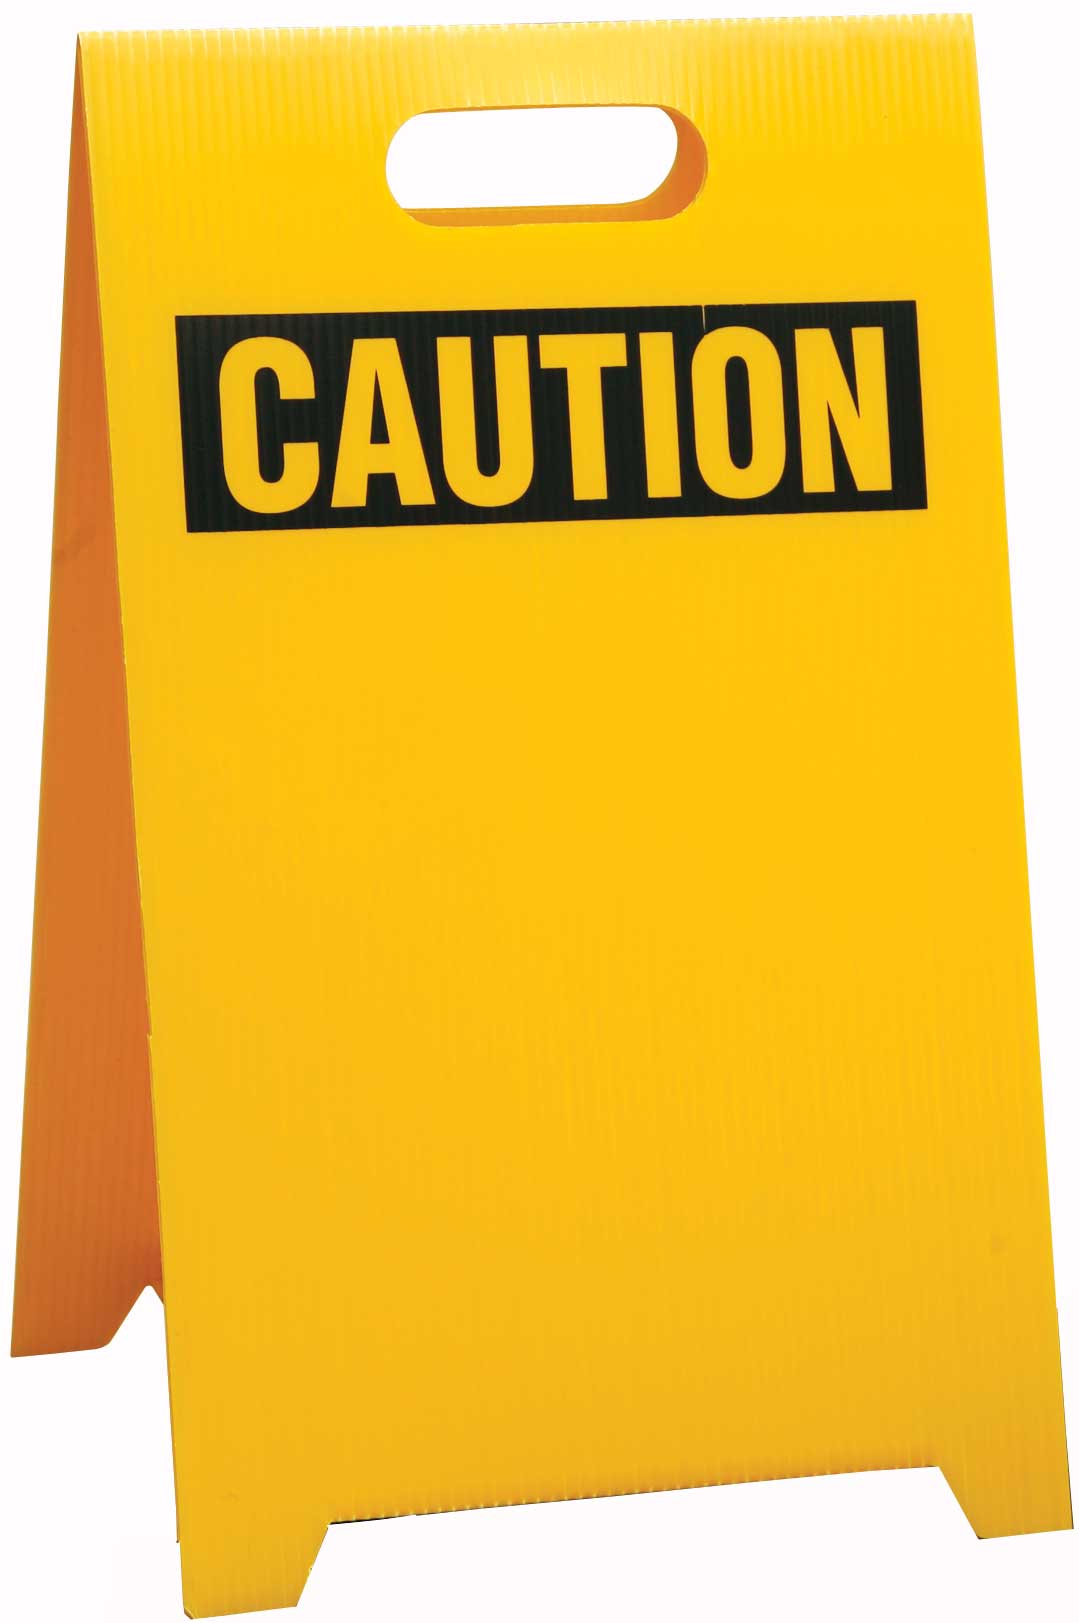 Larger Photo - Yellow Blank Floor Stand Sign w/ Caution Legend ...